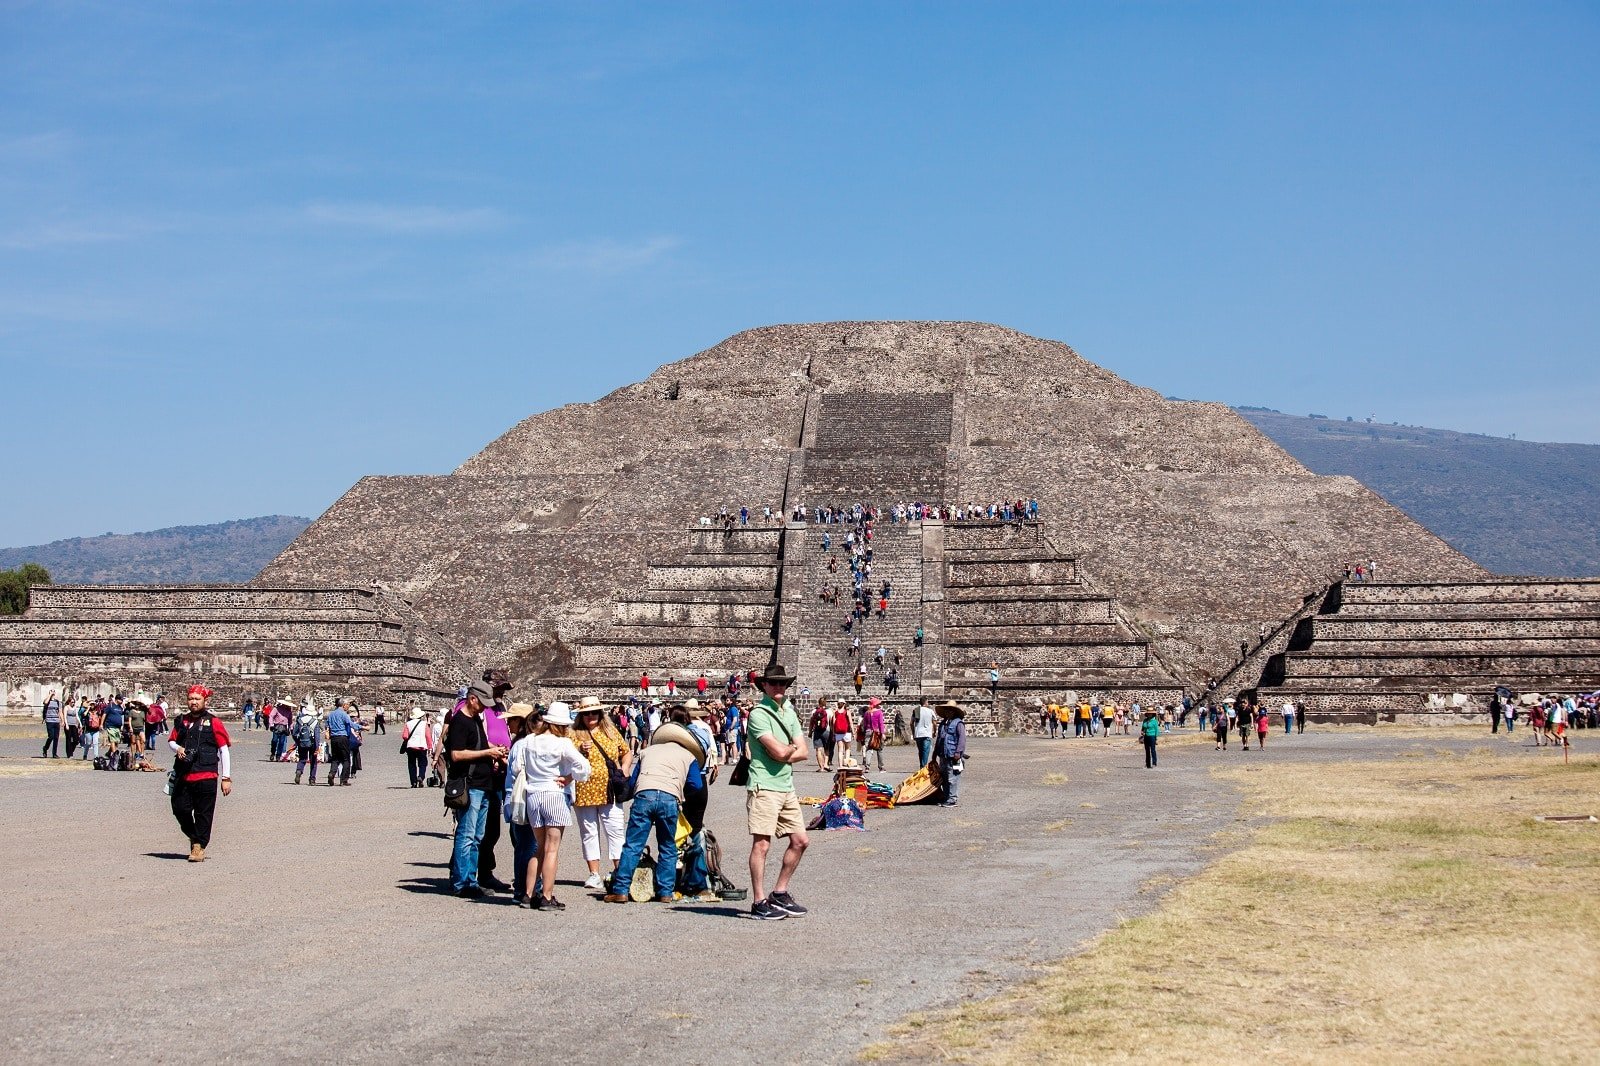 <p><span>In the ancient city of Teotihuacan, near Mexico City, you’ll find the Pyramid of the Sun and the Pyramid of the Moon. Climbing the steep steps of the Pyramid of the Sun, you’ll feel a deep connection to the rituals and beliefs of its builders.</span></p> <p><b>Traveler’s Insight: </b><span>Plan a visit during the equinoxes to witness the mesmerizing play of light and shadow, believed to be linked to agricultural cycles.</span></p> <p><b>Getting There: </b><span>Teotihuacan is about 50 kilometers from Mexico City. You can take a bus from the North Bus Terminal (Autobuses del Norte) in Mexico City, which drops you at the site’s entrance.</span></p> <p><b>Things to Consider: </b><span>Visit early in the morning to avoid crowds and the midday heat. Wear comfortable shoes for climbing the pyramids, and bring water and sun protection.</span></p>